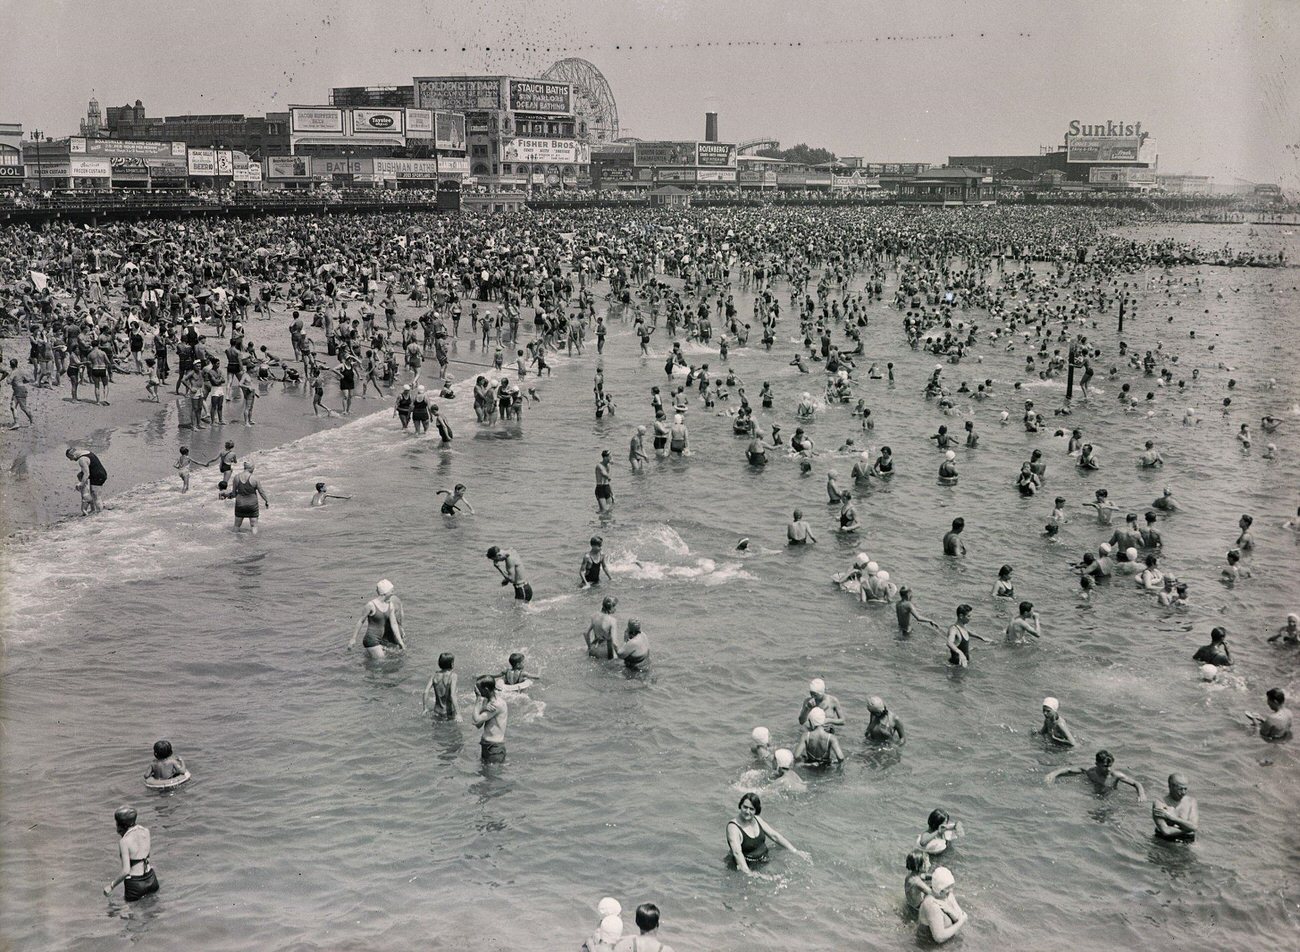 General View Of Crowd On Coney Island Beach, August 5, 1935